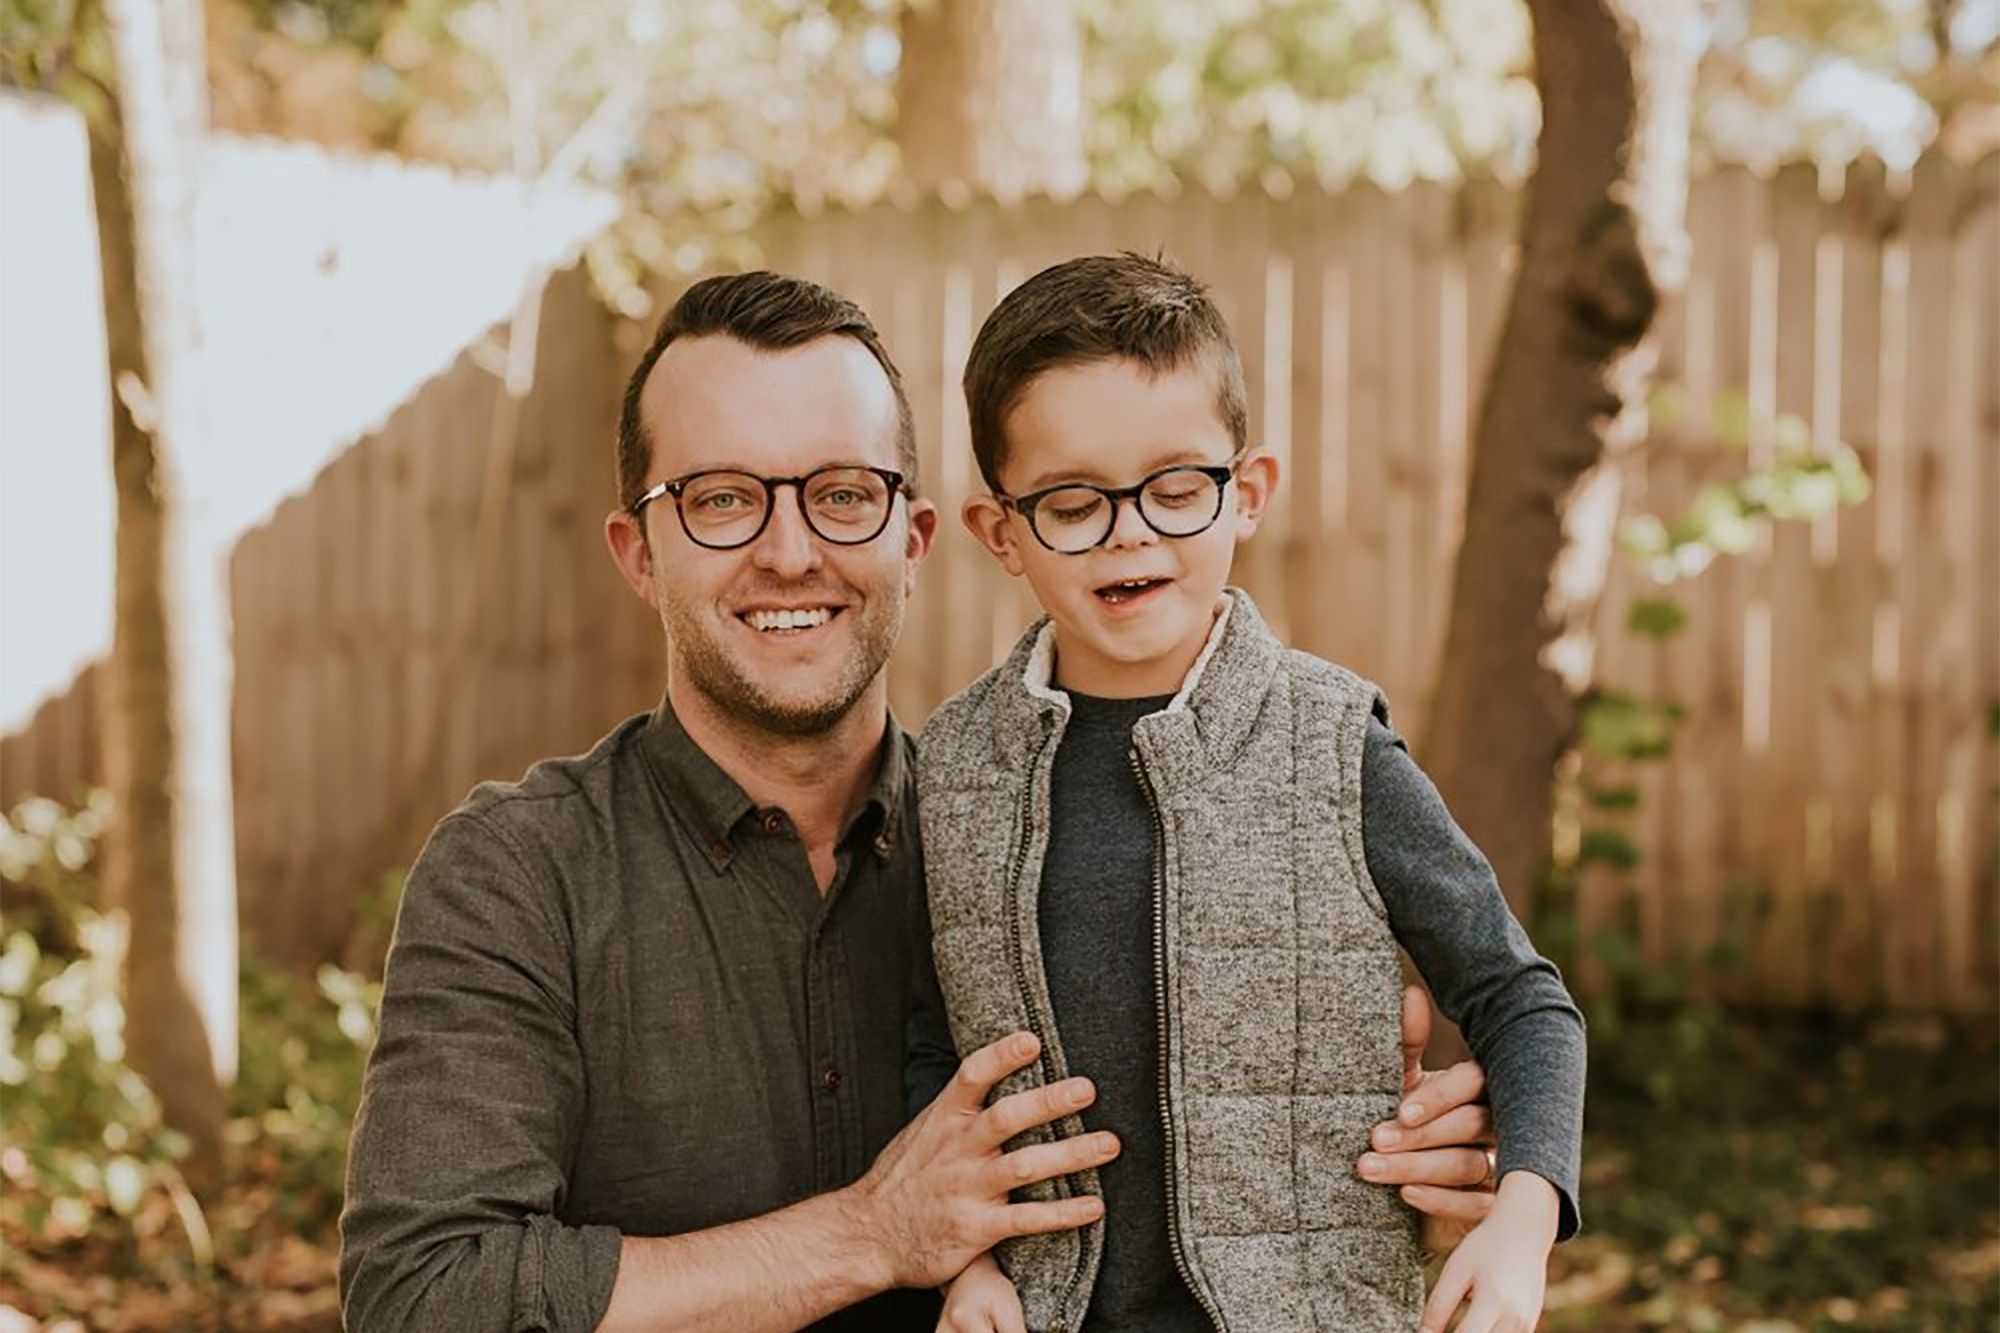 When Our Son Was Born Nearly Blind We Started an Eyeglass Business for Children